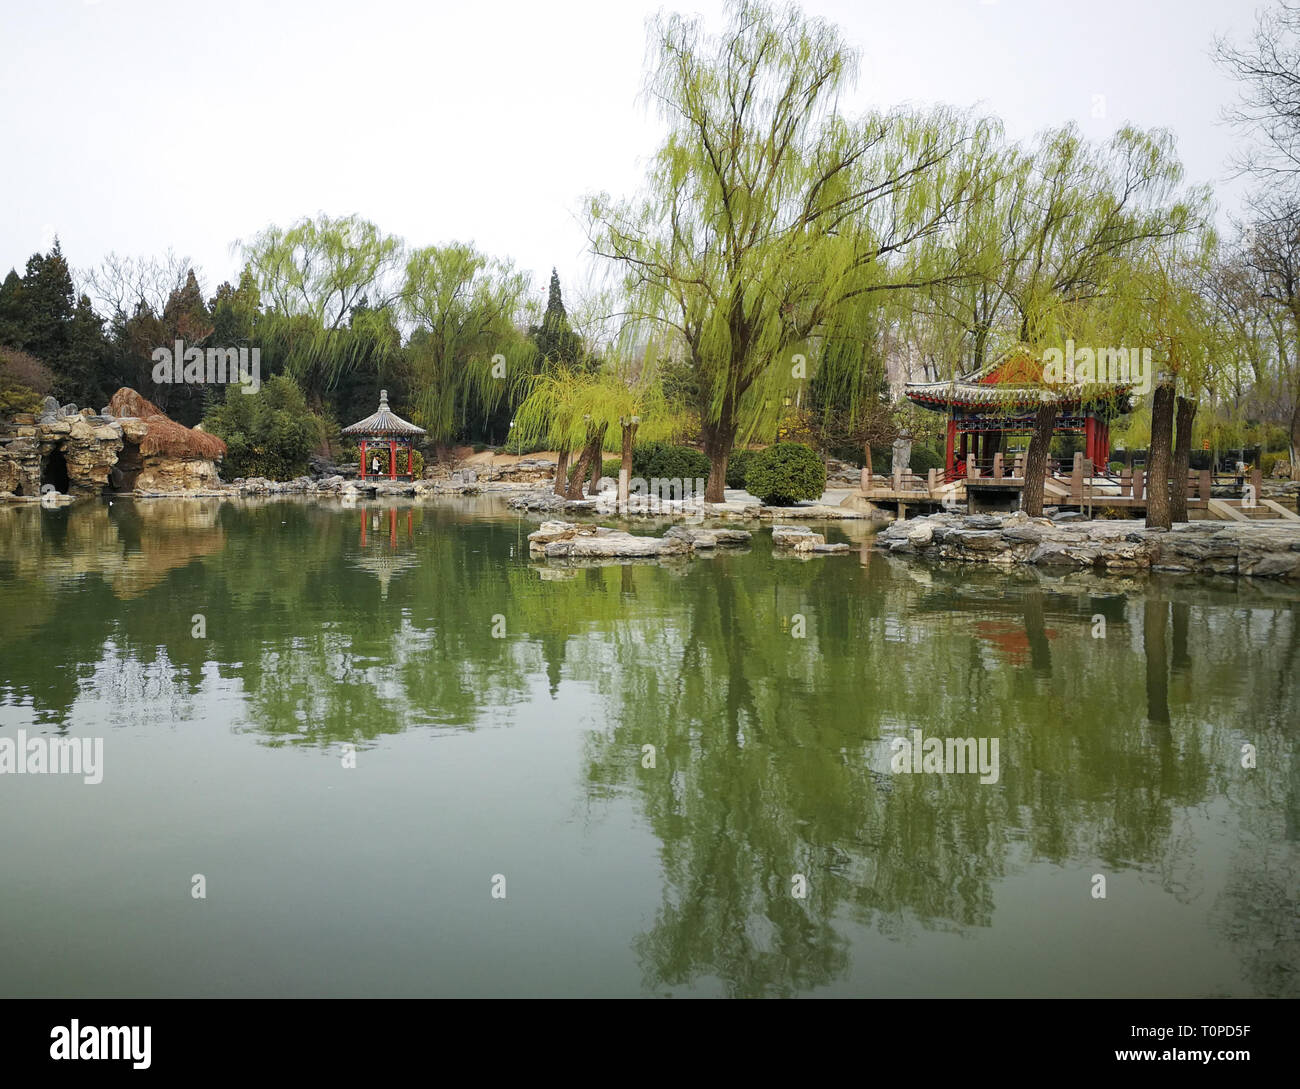 (190321) -- BEIJING, March 21, 2019 (Xinhua) -- Photo taken with a mobile phone shows the spring scenery at Ritan Park in Beijing, capital of China, March 19, 2019. (Xinhua/Meng Chenguang) Stock Photo